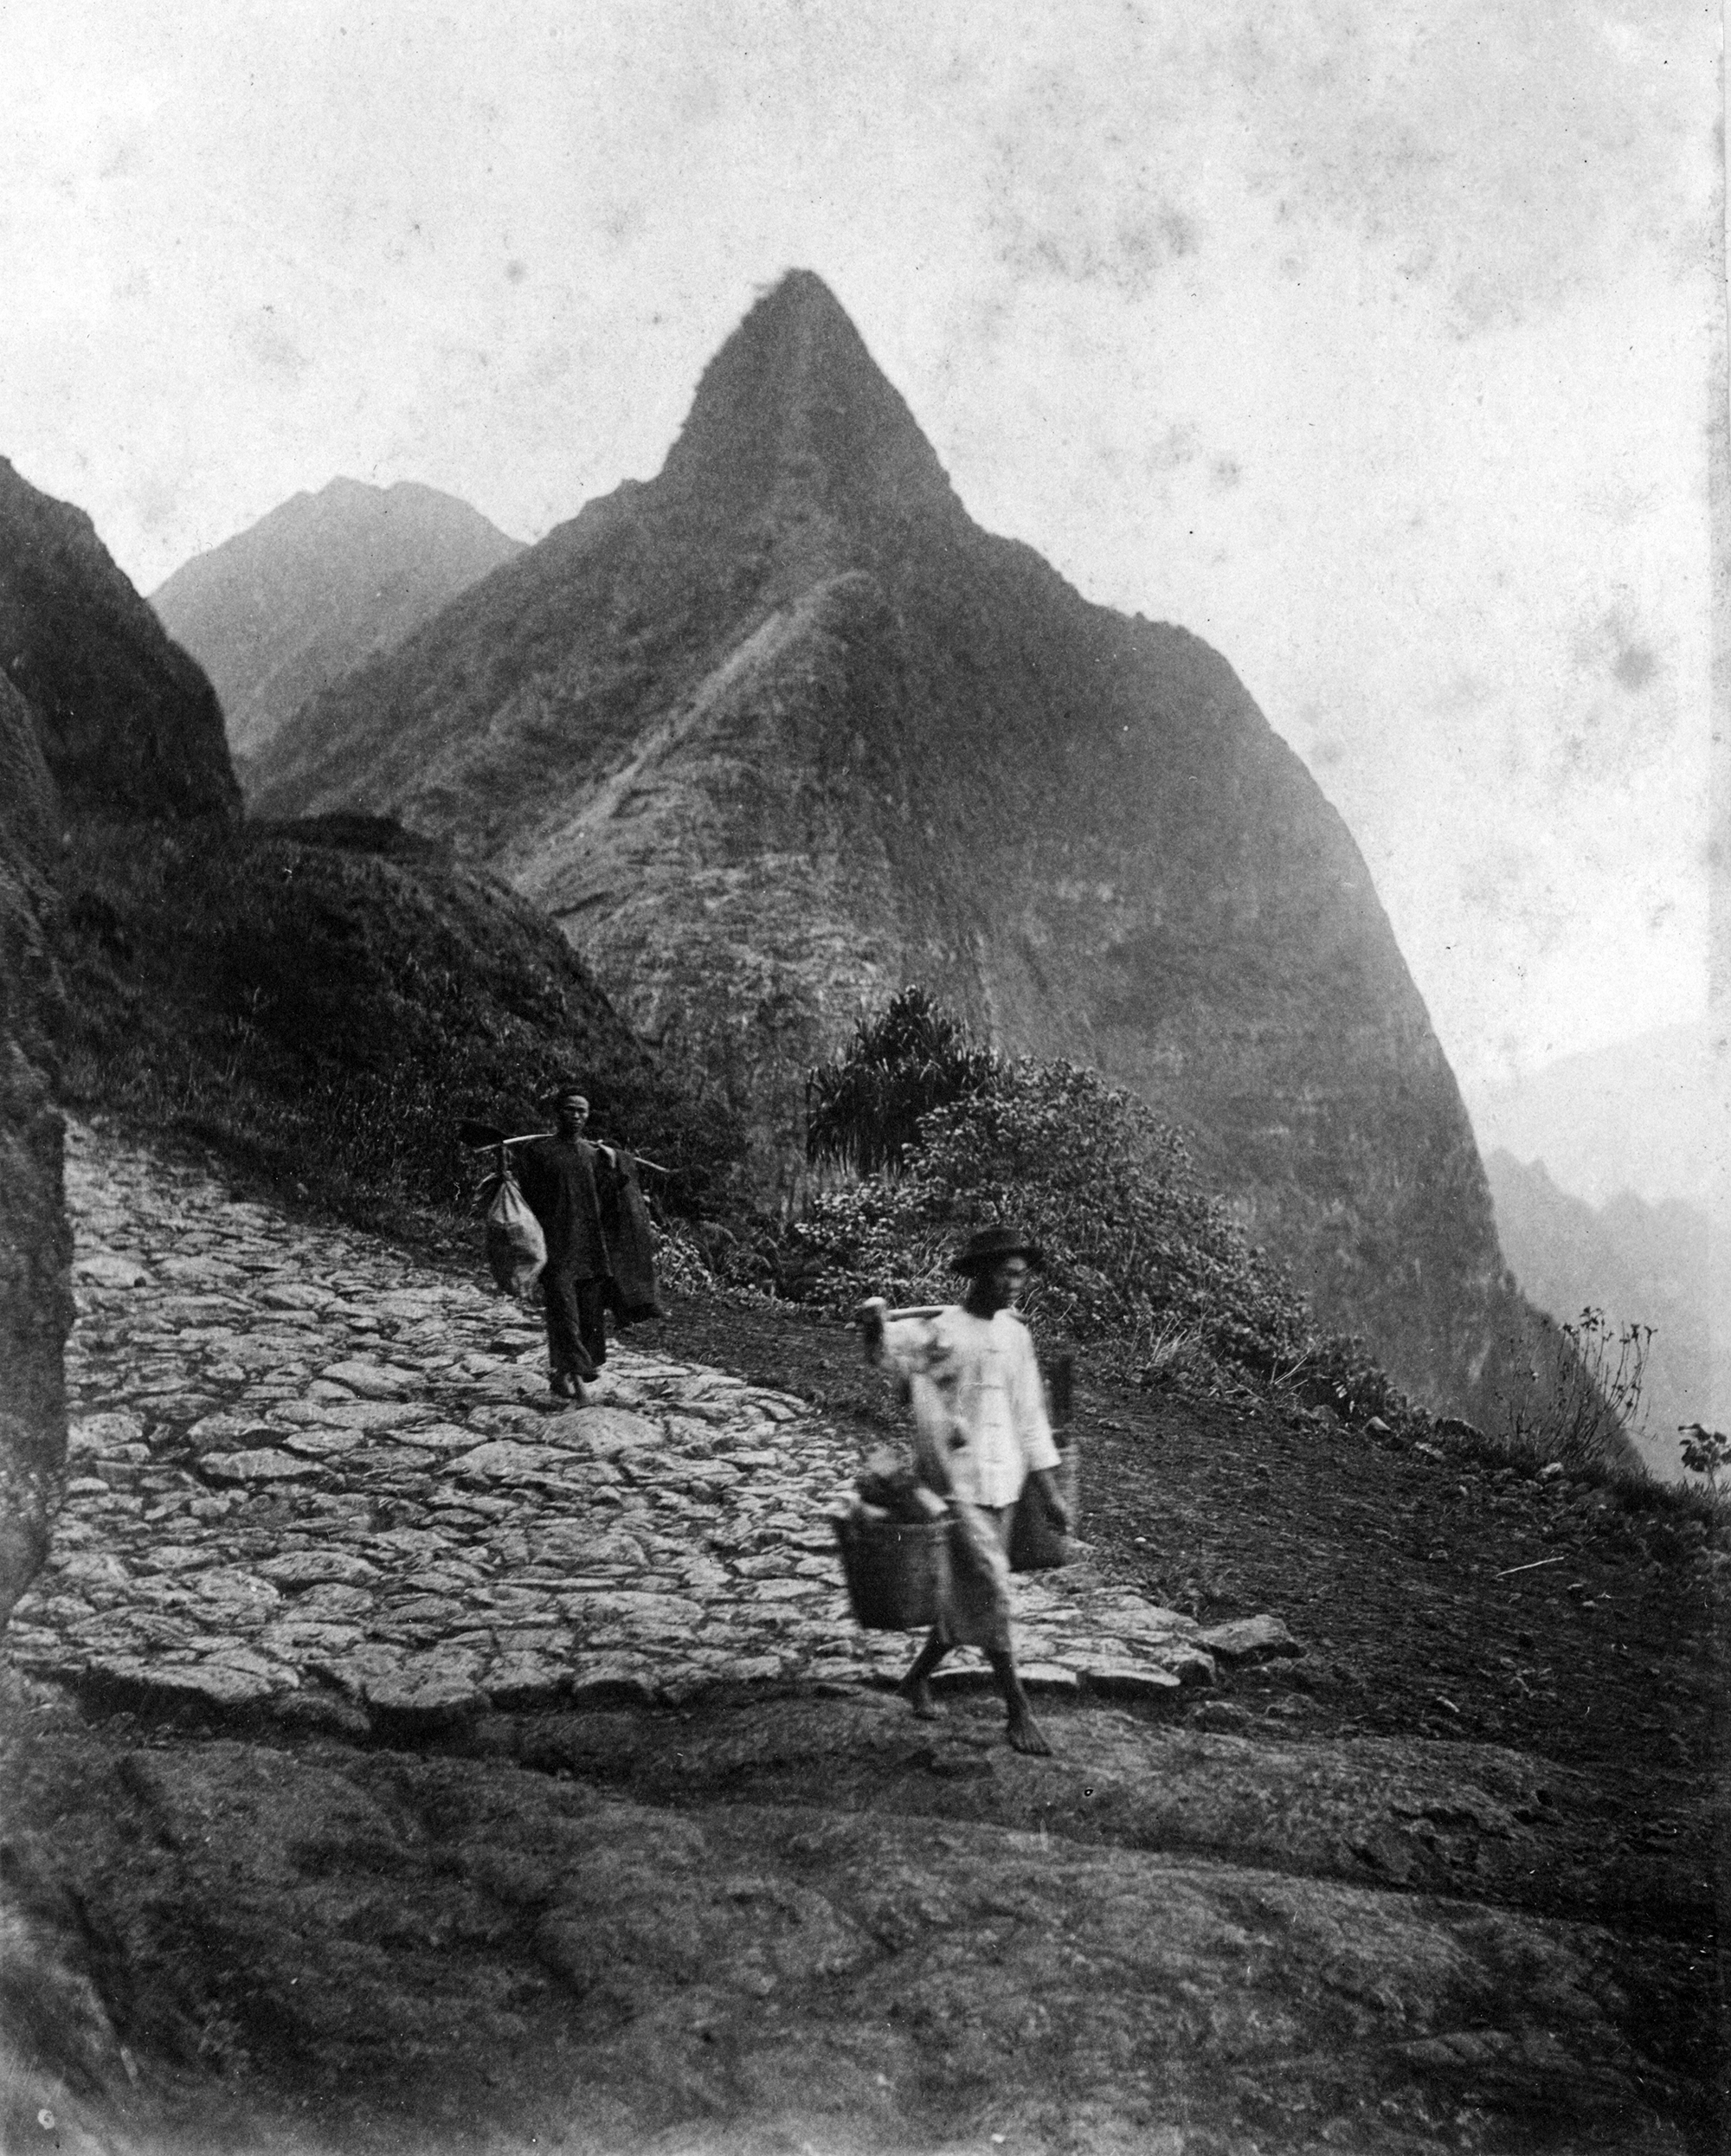 [Men with carrying poles] Walking over Nuʻuanu Pali Road to Kailua; Honolulu, Hawaiʻi, 1886. Photo by Alfred Mitchell.